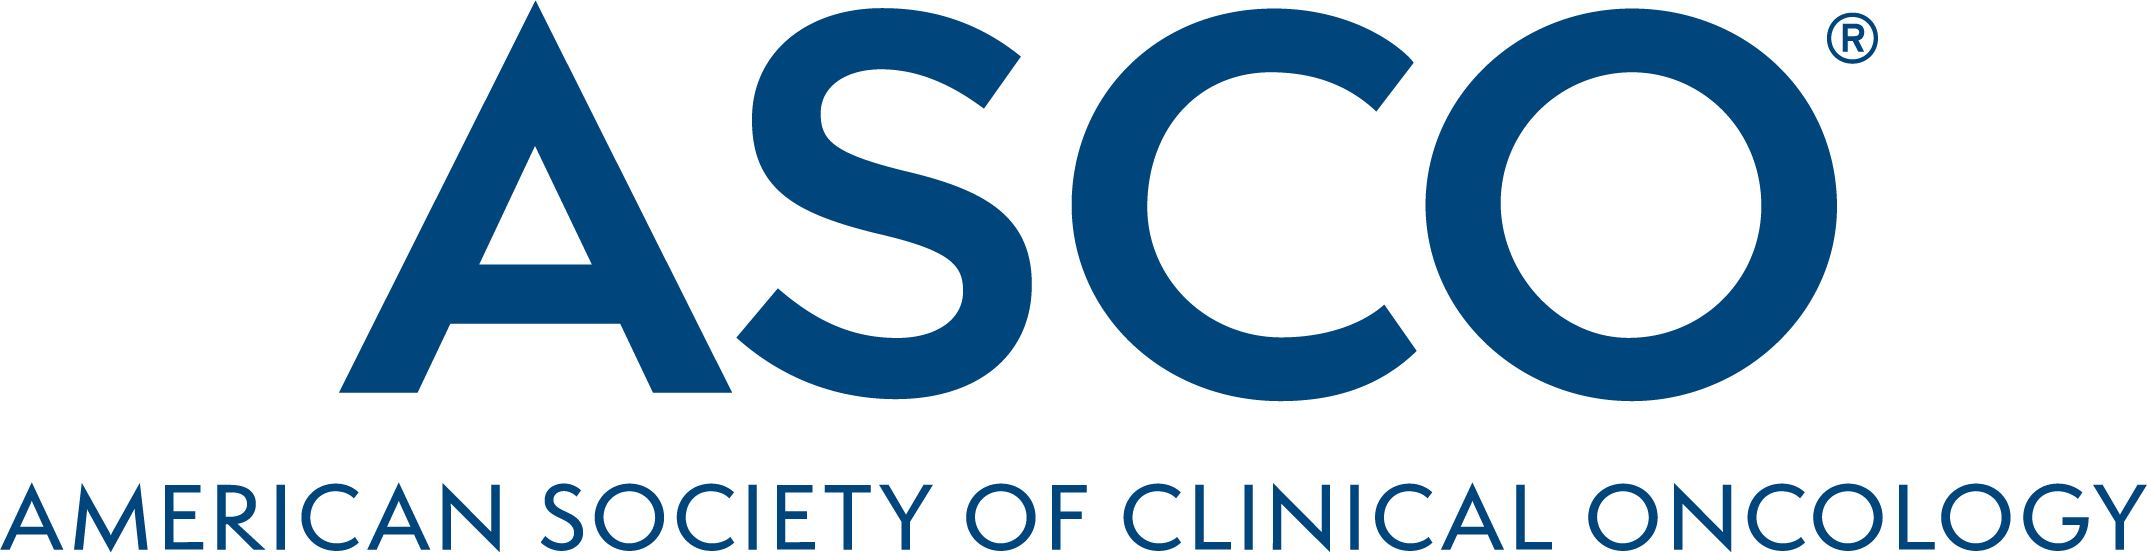 American Society of Clinical Oncology (ASCO) - Virginia USA United States of America